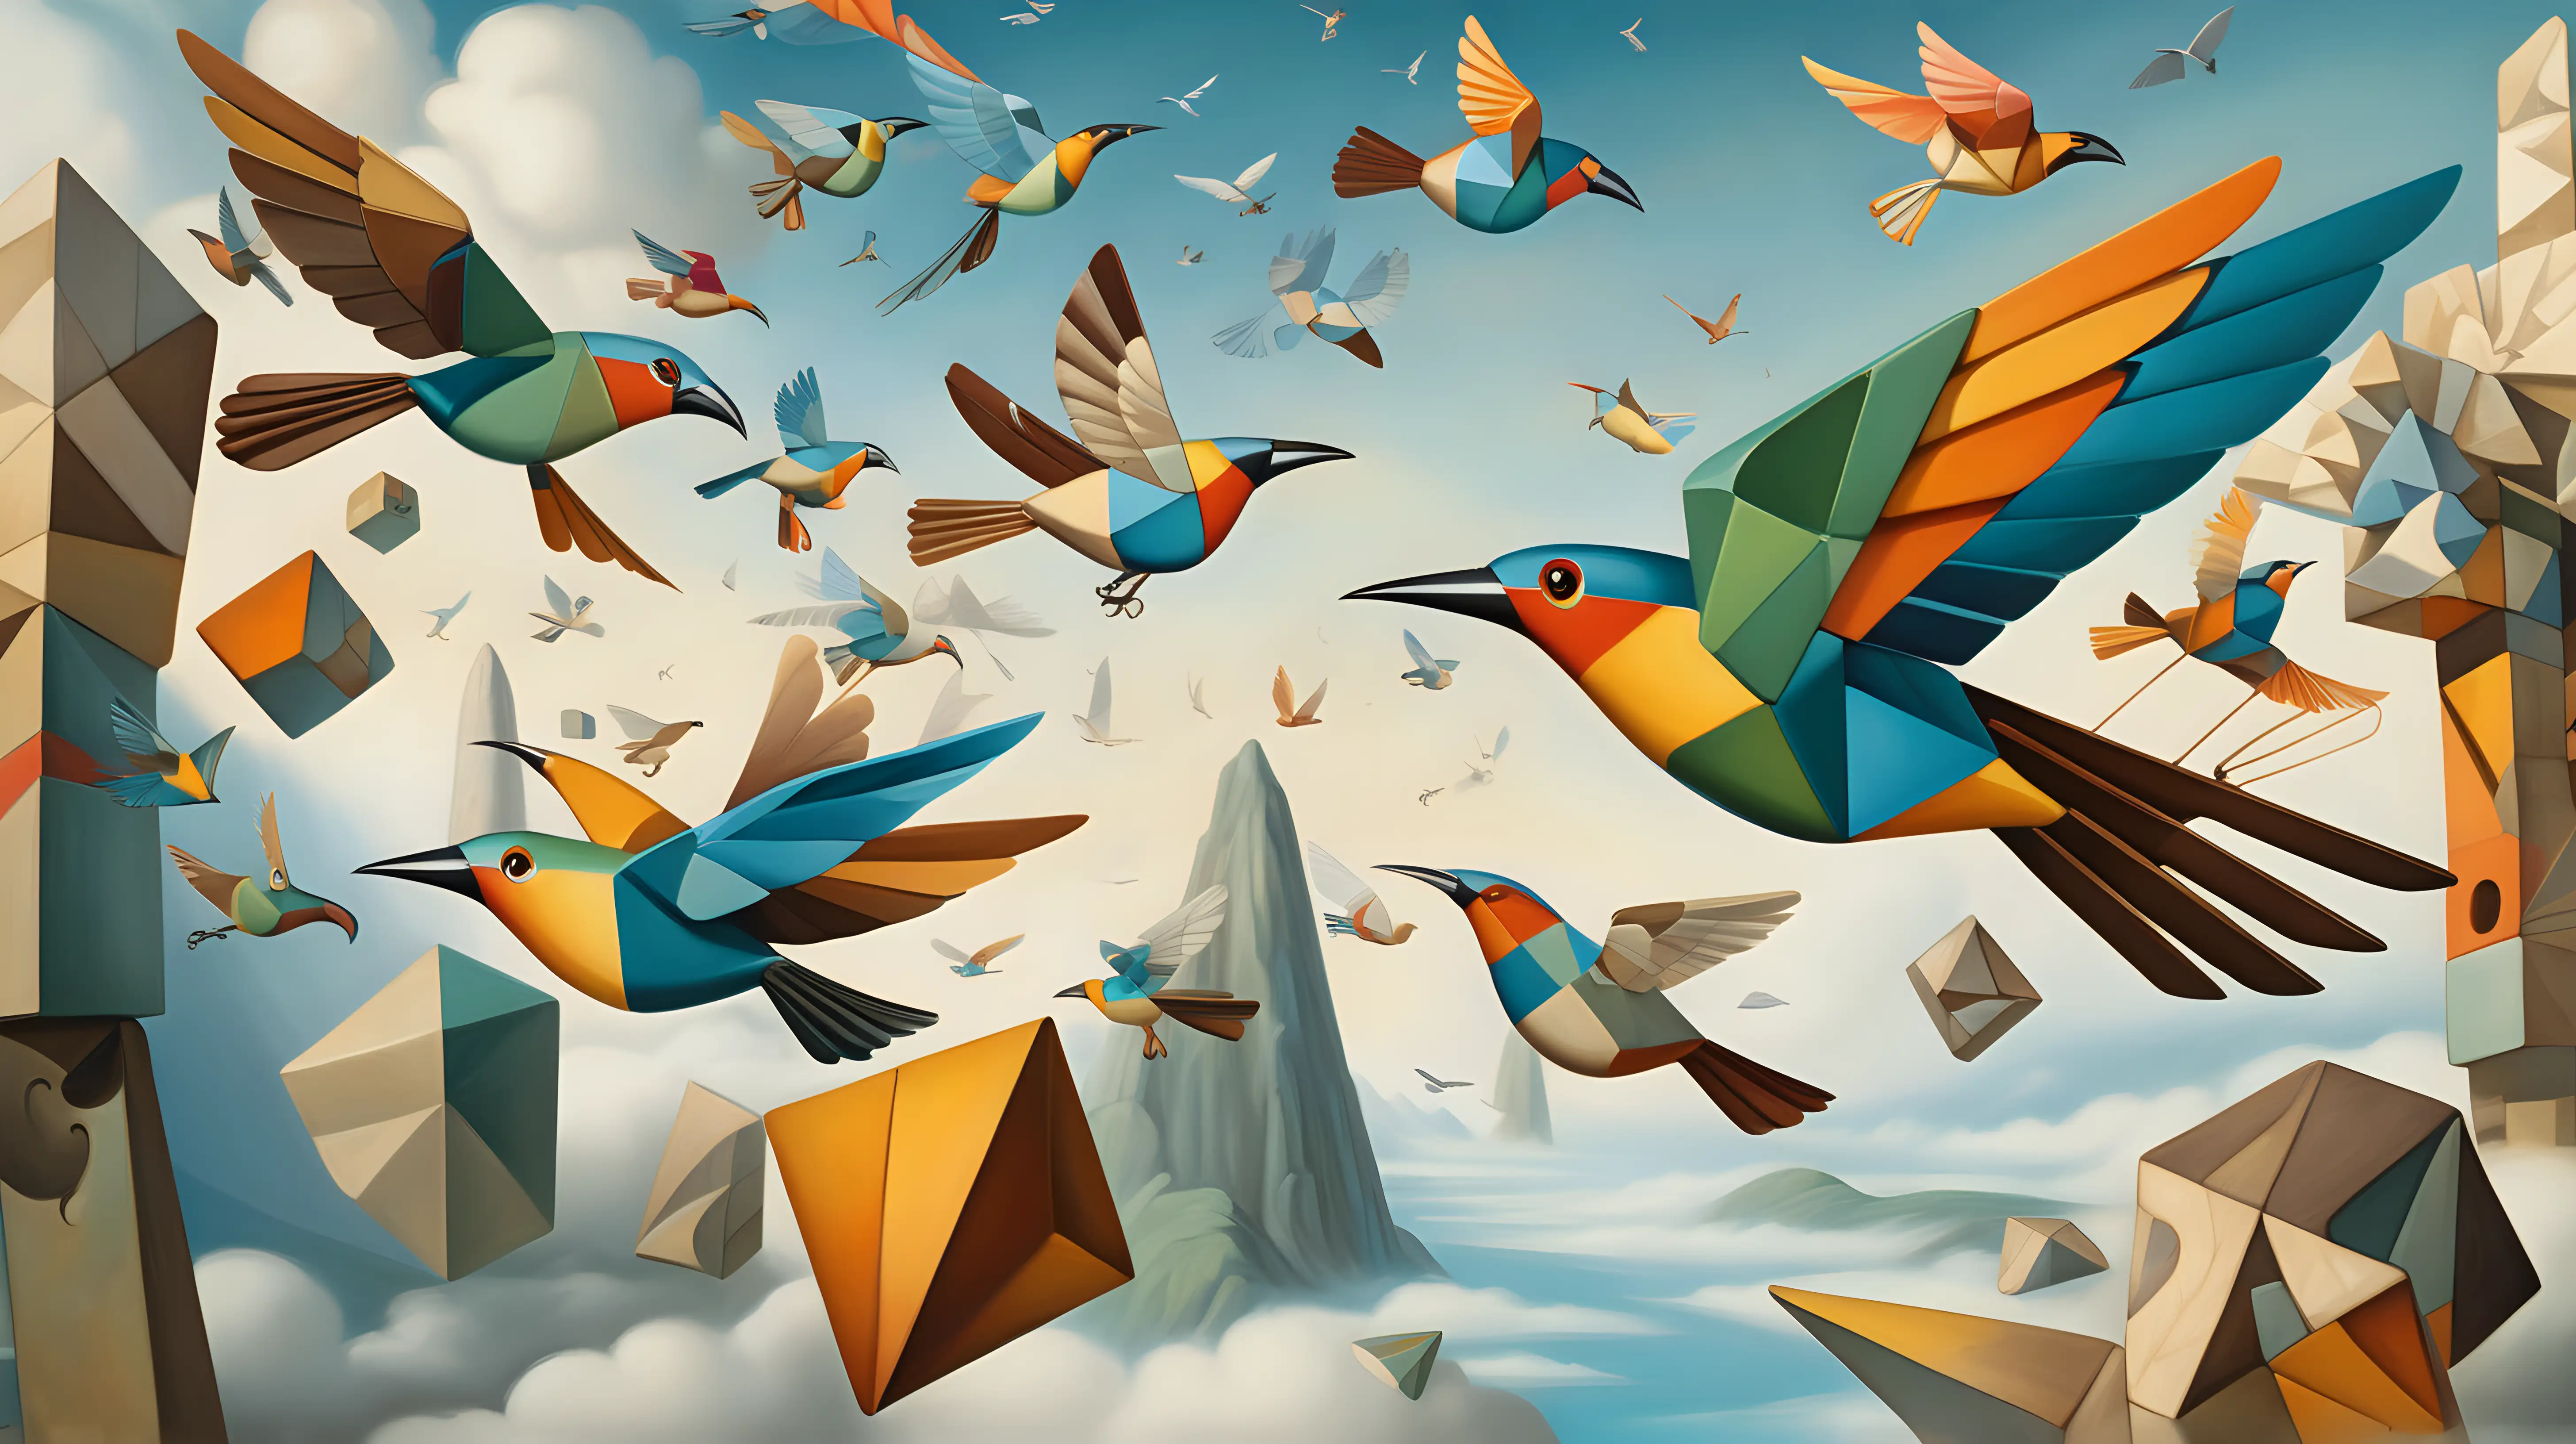 Cubist Dreams of Flight: Render the exhilarating sensation of flight through a Cubist interpretation, where soaring birds and floating objects converge in a dreamscape suspended between earth and sky.